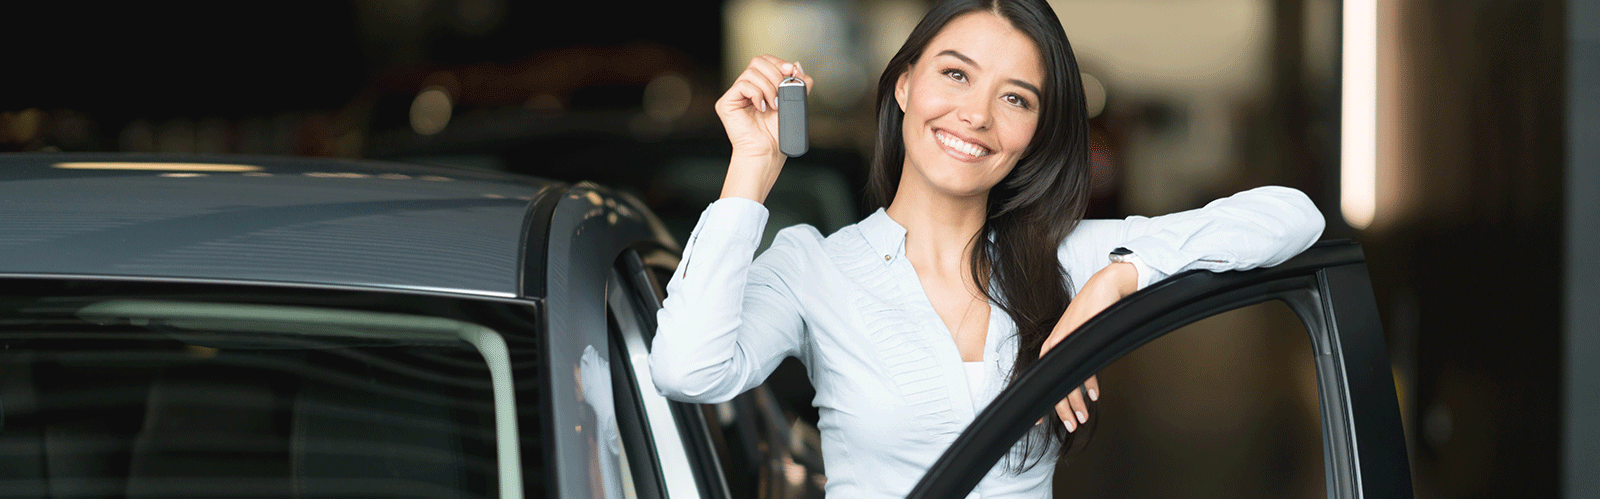 woman smiling while holding up keys